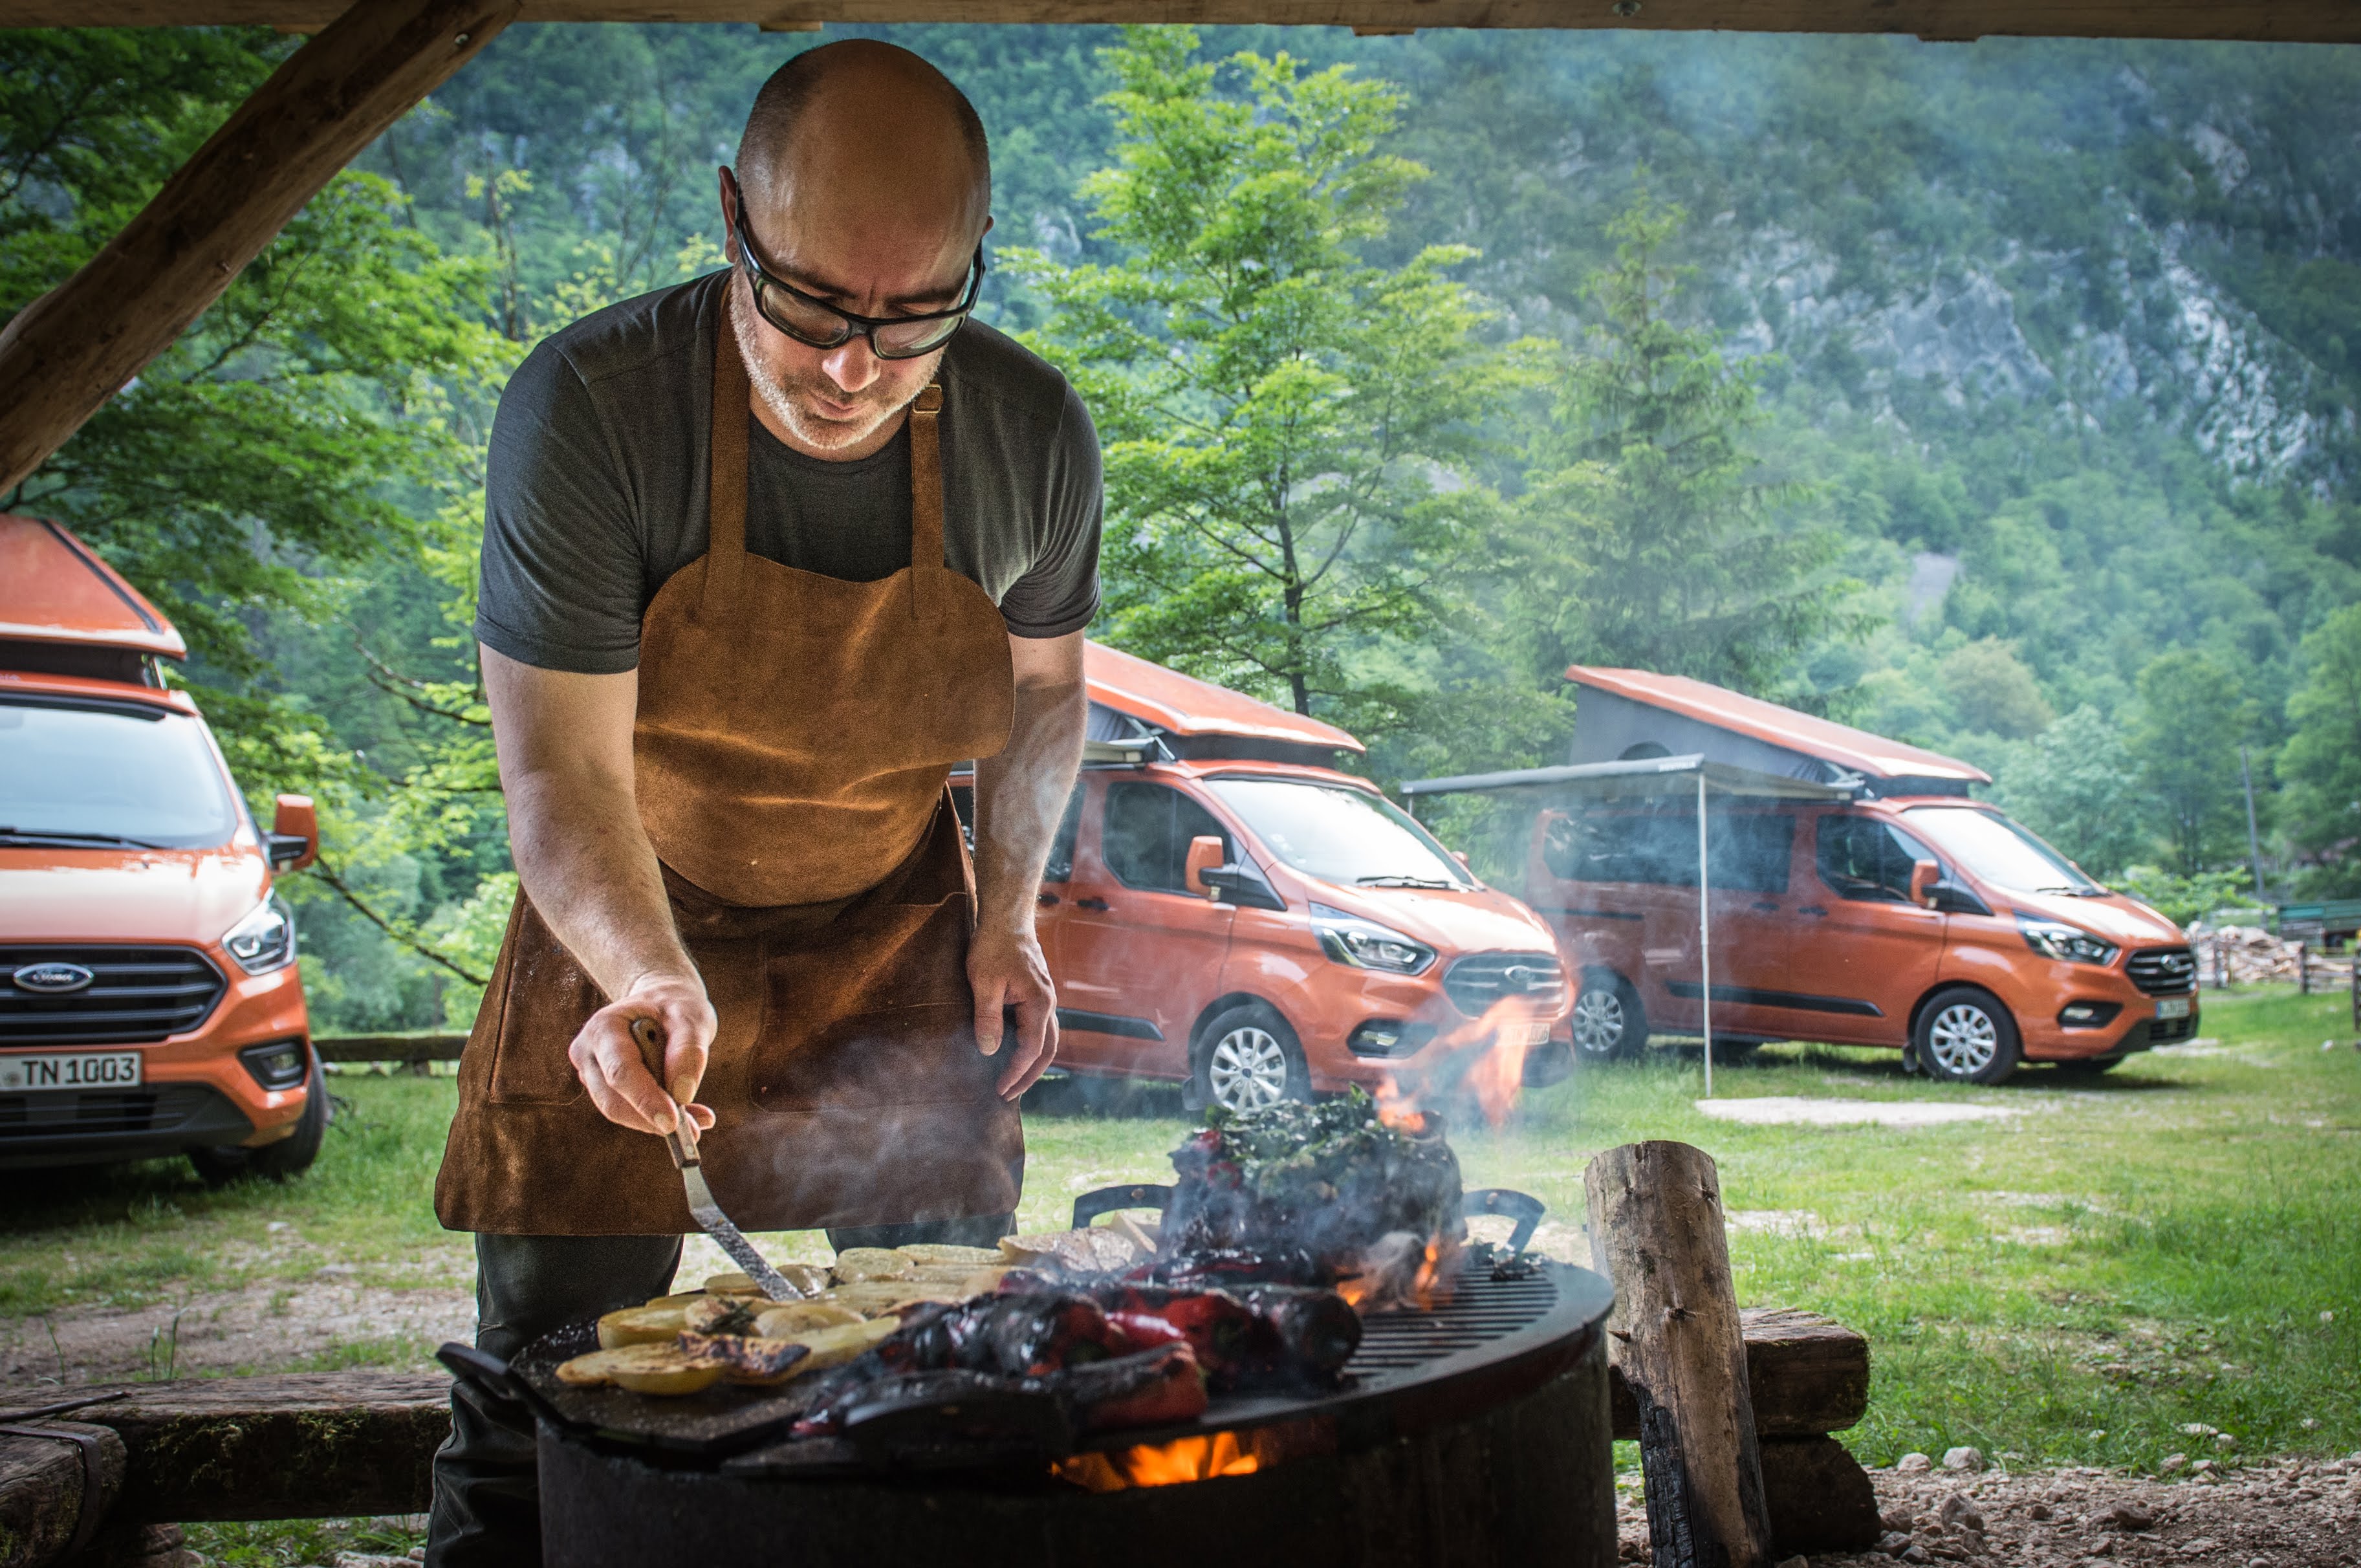 Kieran Creevy on cooking in the mountains, storytelling and rustic elegance